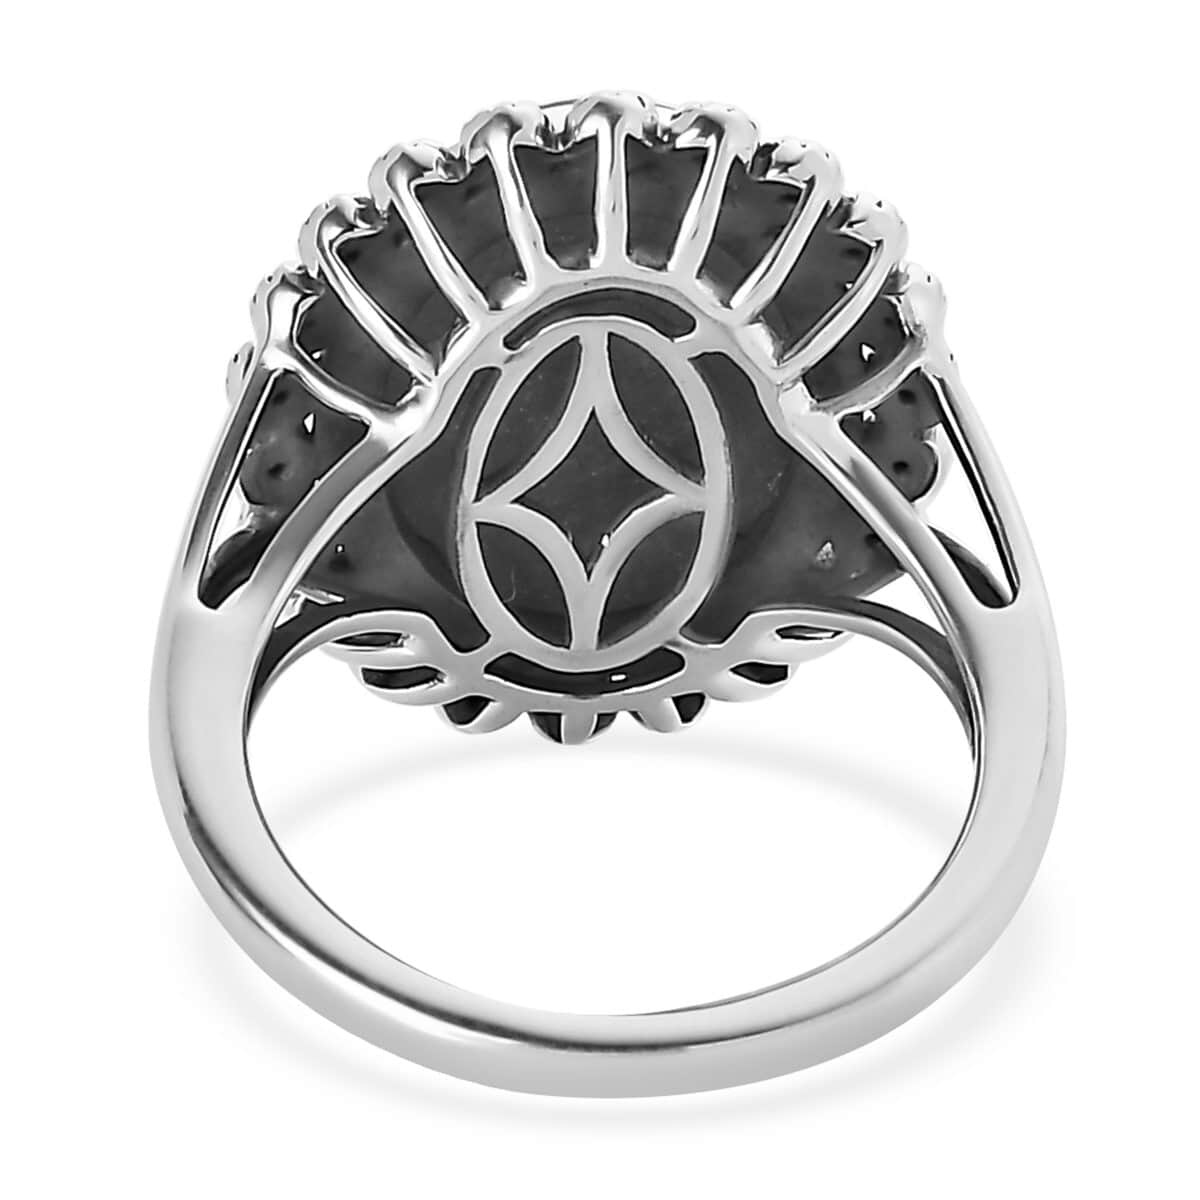 Connemara Marble and Swiss Marcasite Ring in Sterling Silver 7.65 ctw (Delivery in 3-5 Business Days) image number 4